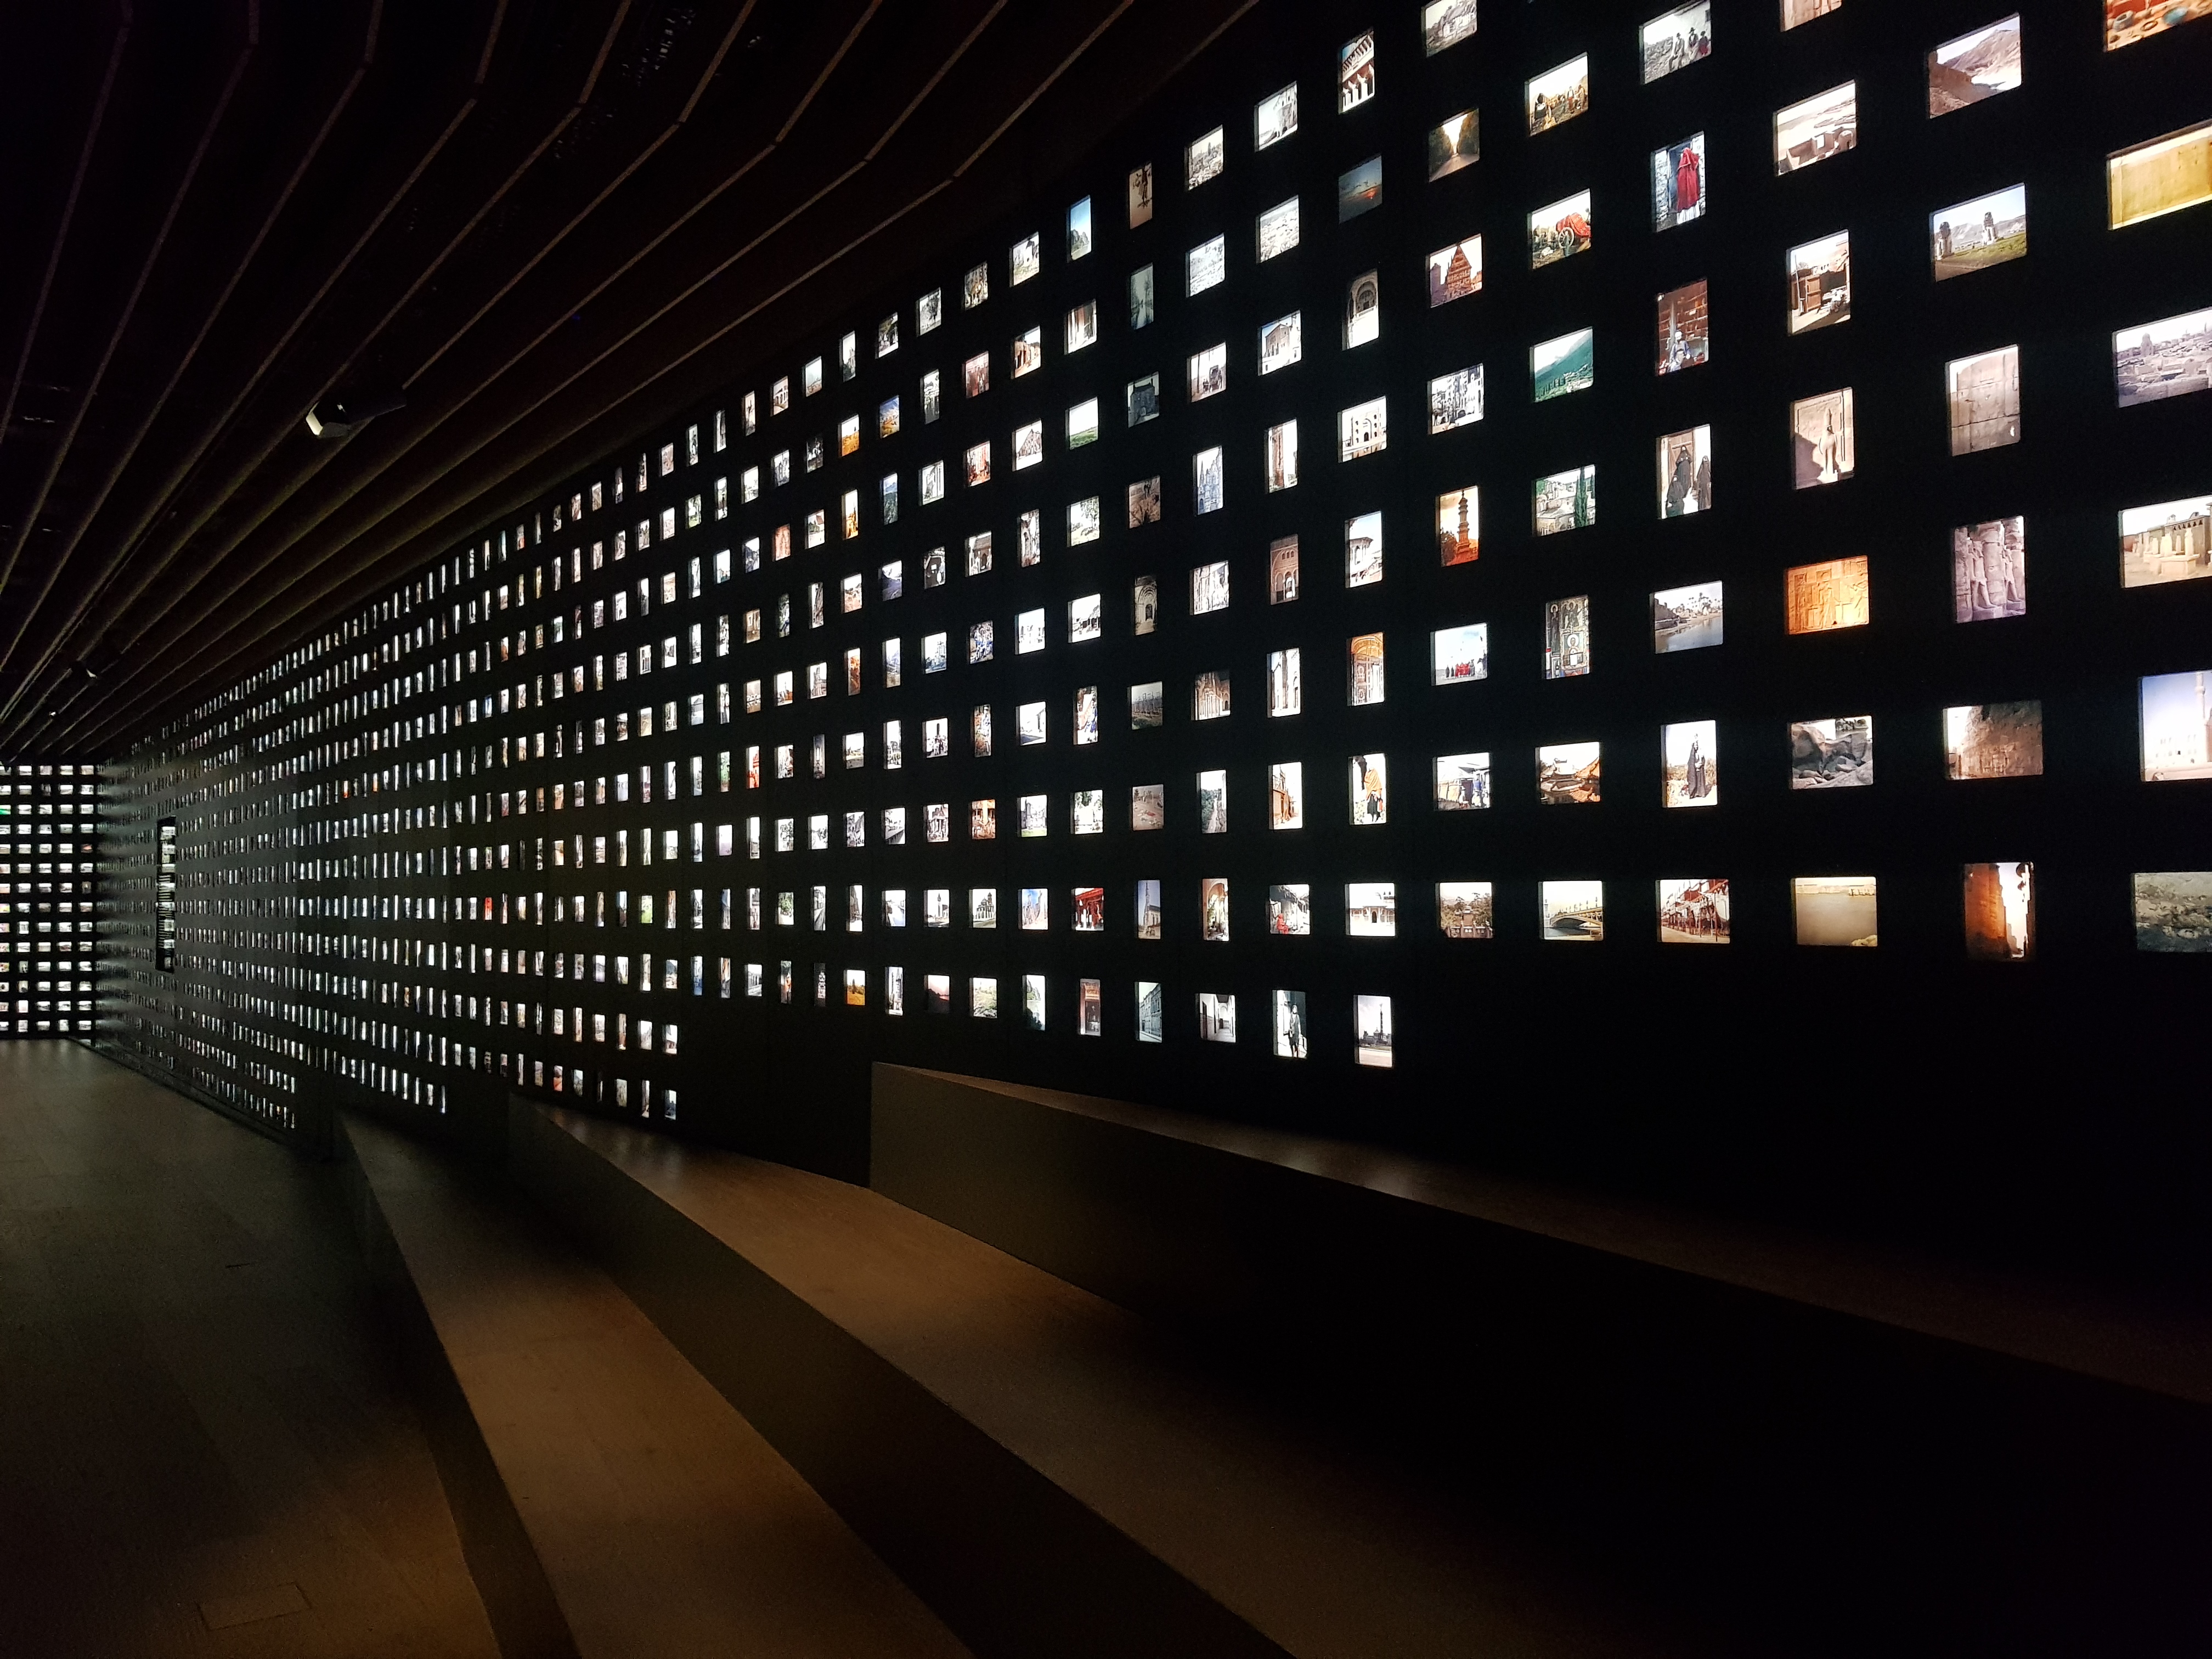 Interior view of a museum showing a wall display of illuminated slides